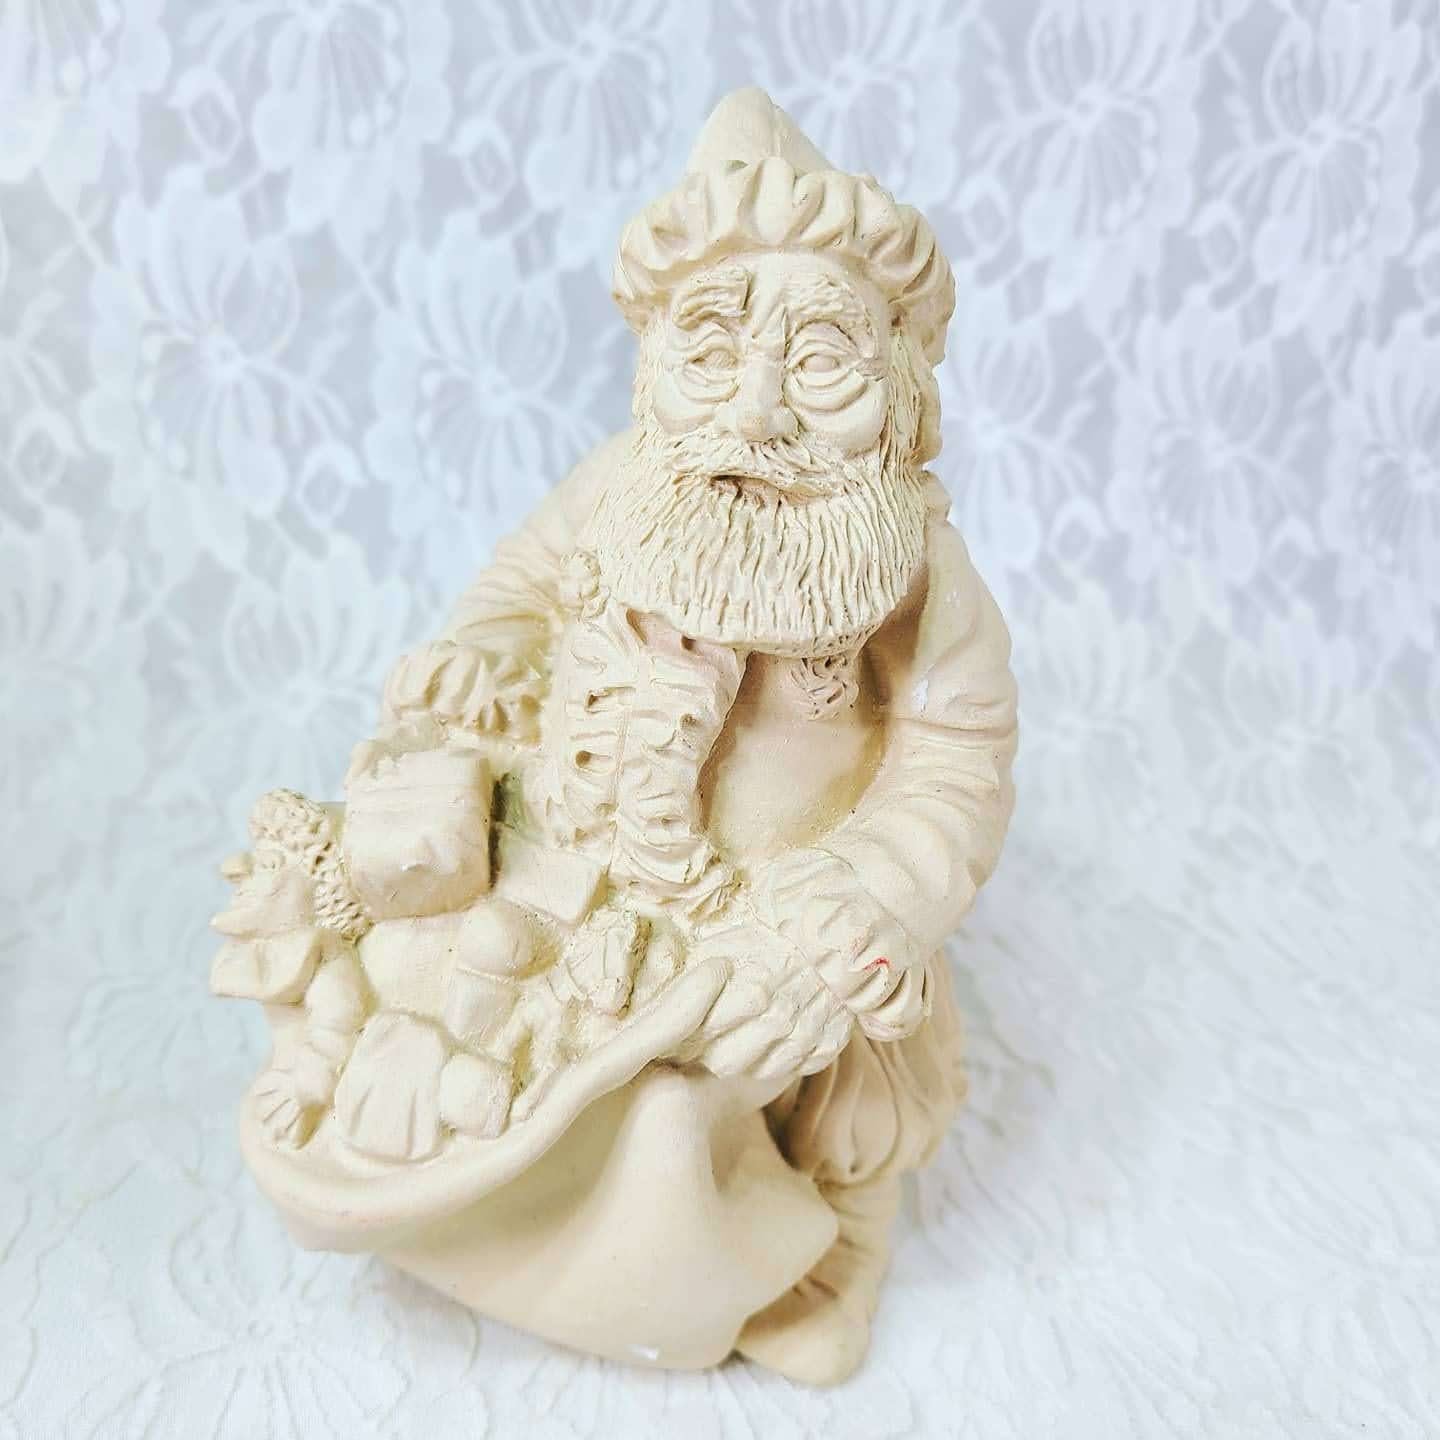 Christmas Santa Claus Figures CRAFTS! Resin or Clay Set of Three (3) HEAVY Santa Statue Figurines ~ Ready to Paint ~ Holiday Décor Decoration